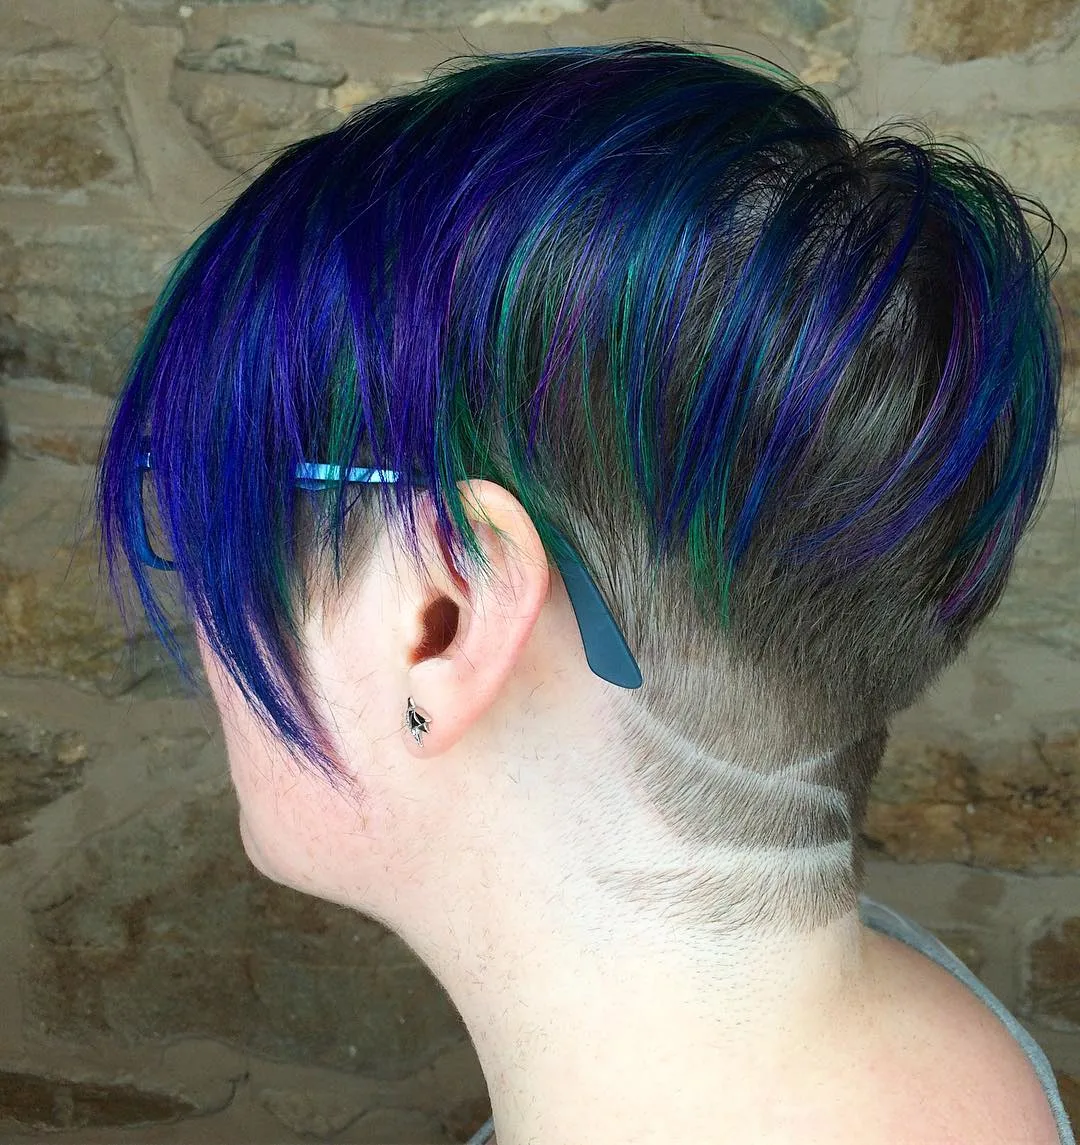 Woman with a shaved undercut and glasses with dark blue hair on top which is kept long